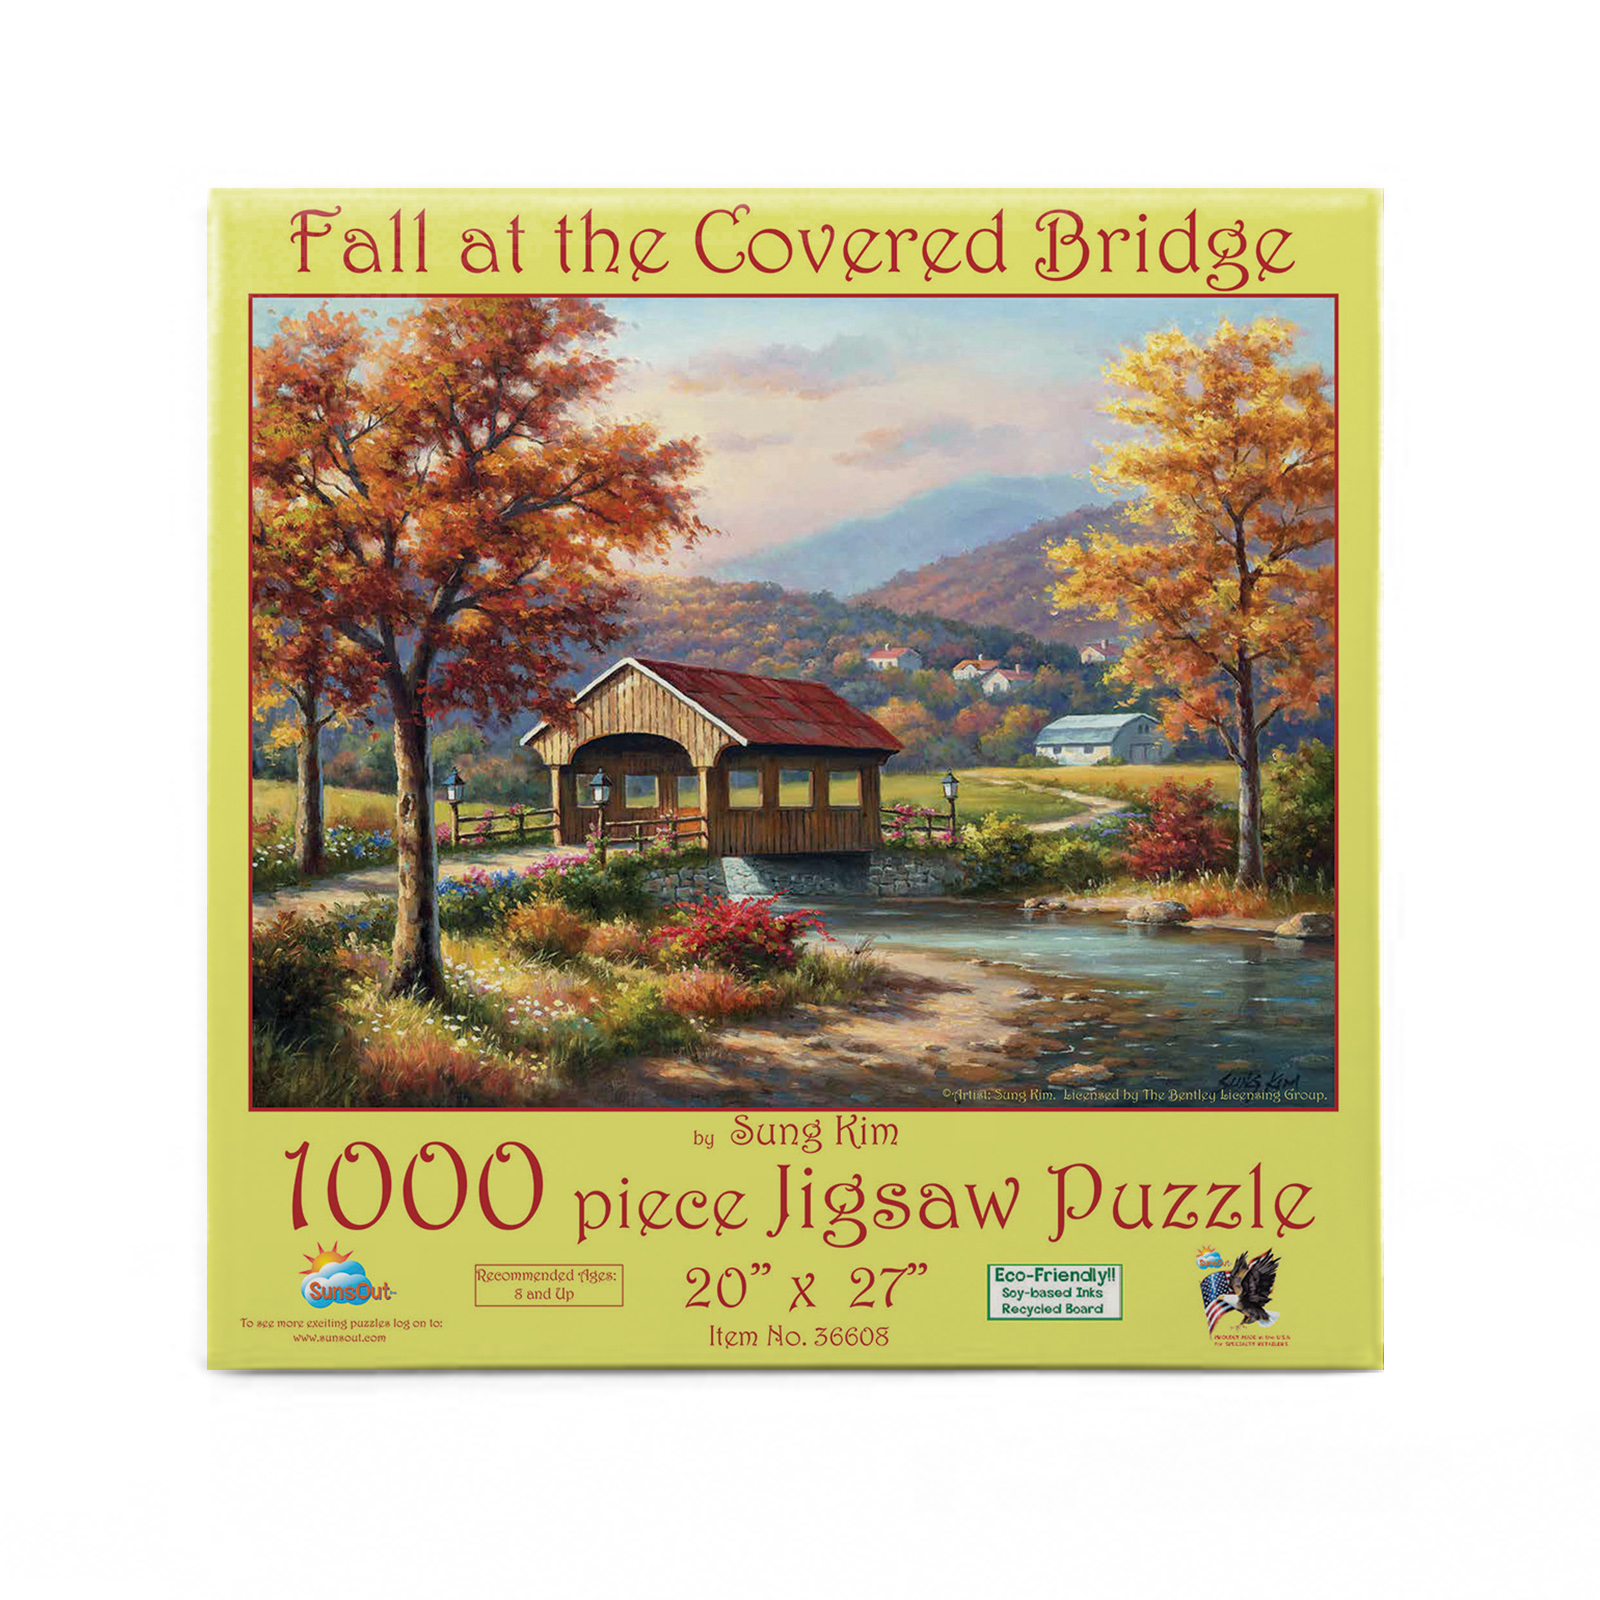 Fall at the Covered Bridge